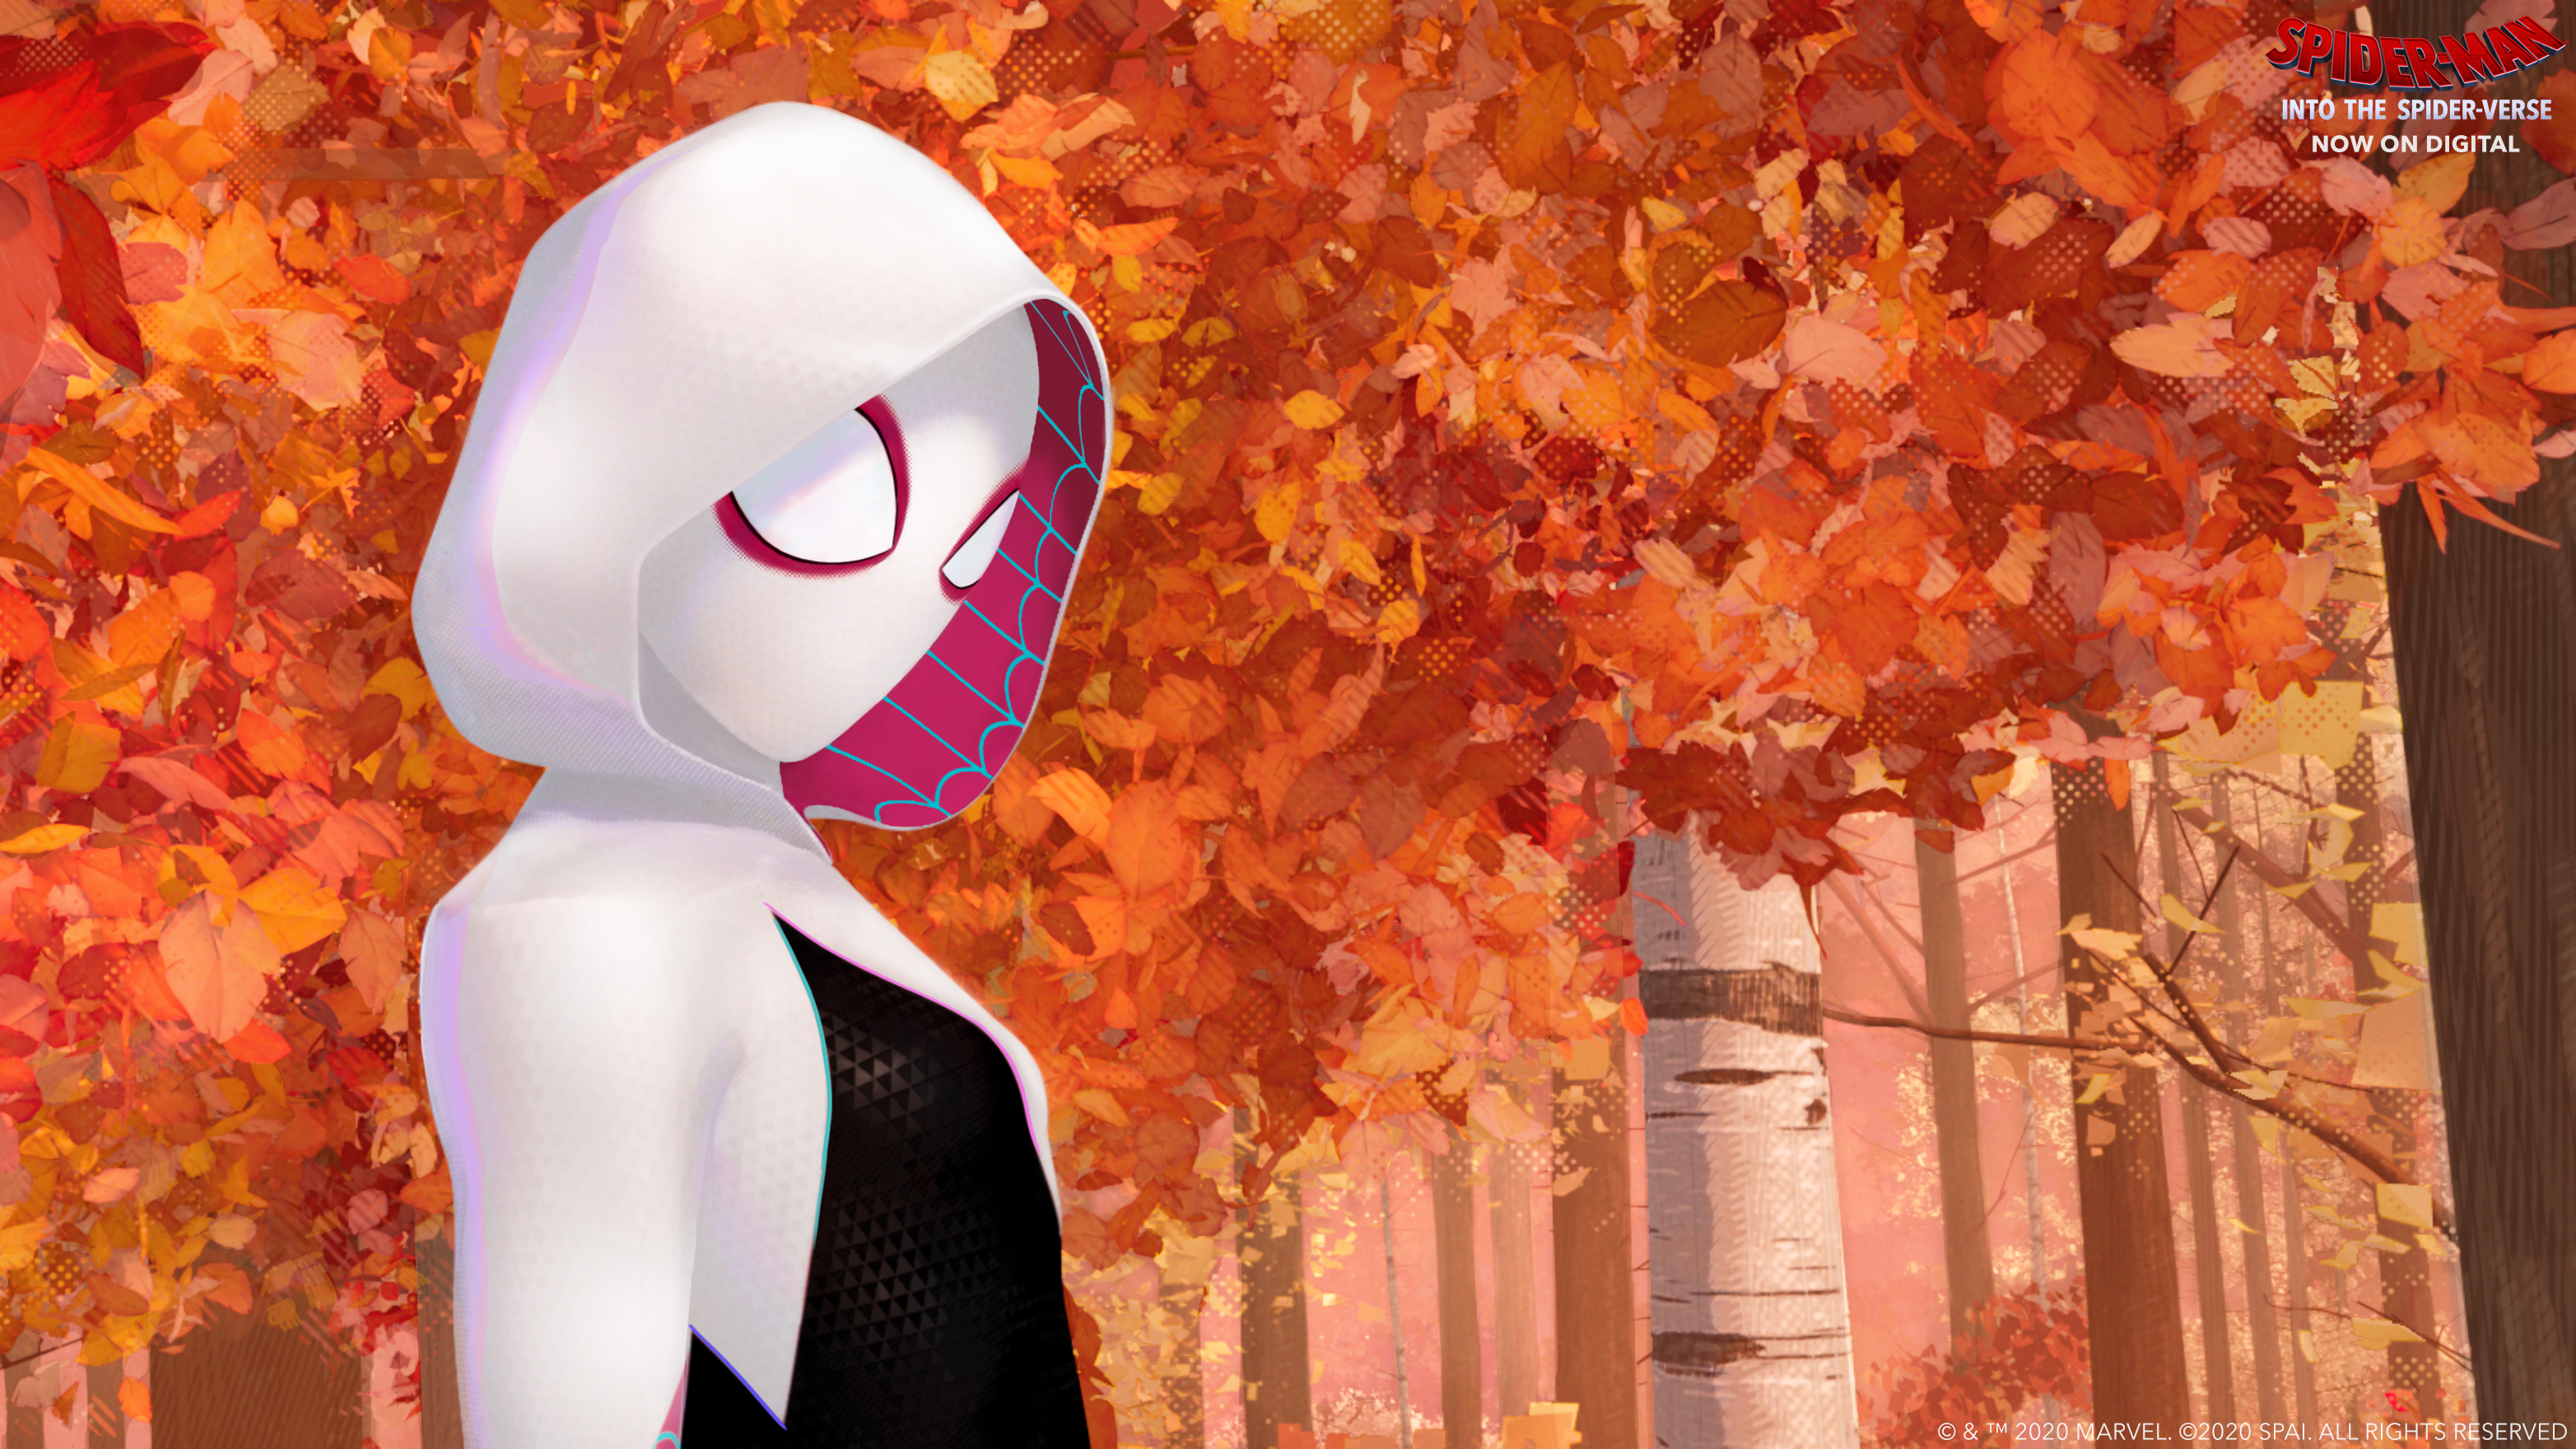 Sony Pictures on X: The #SpiderVerse is yours! Become a member of